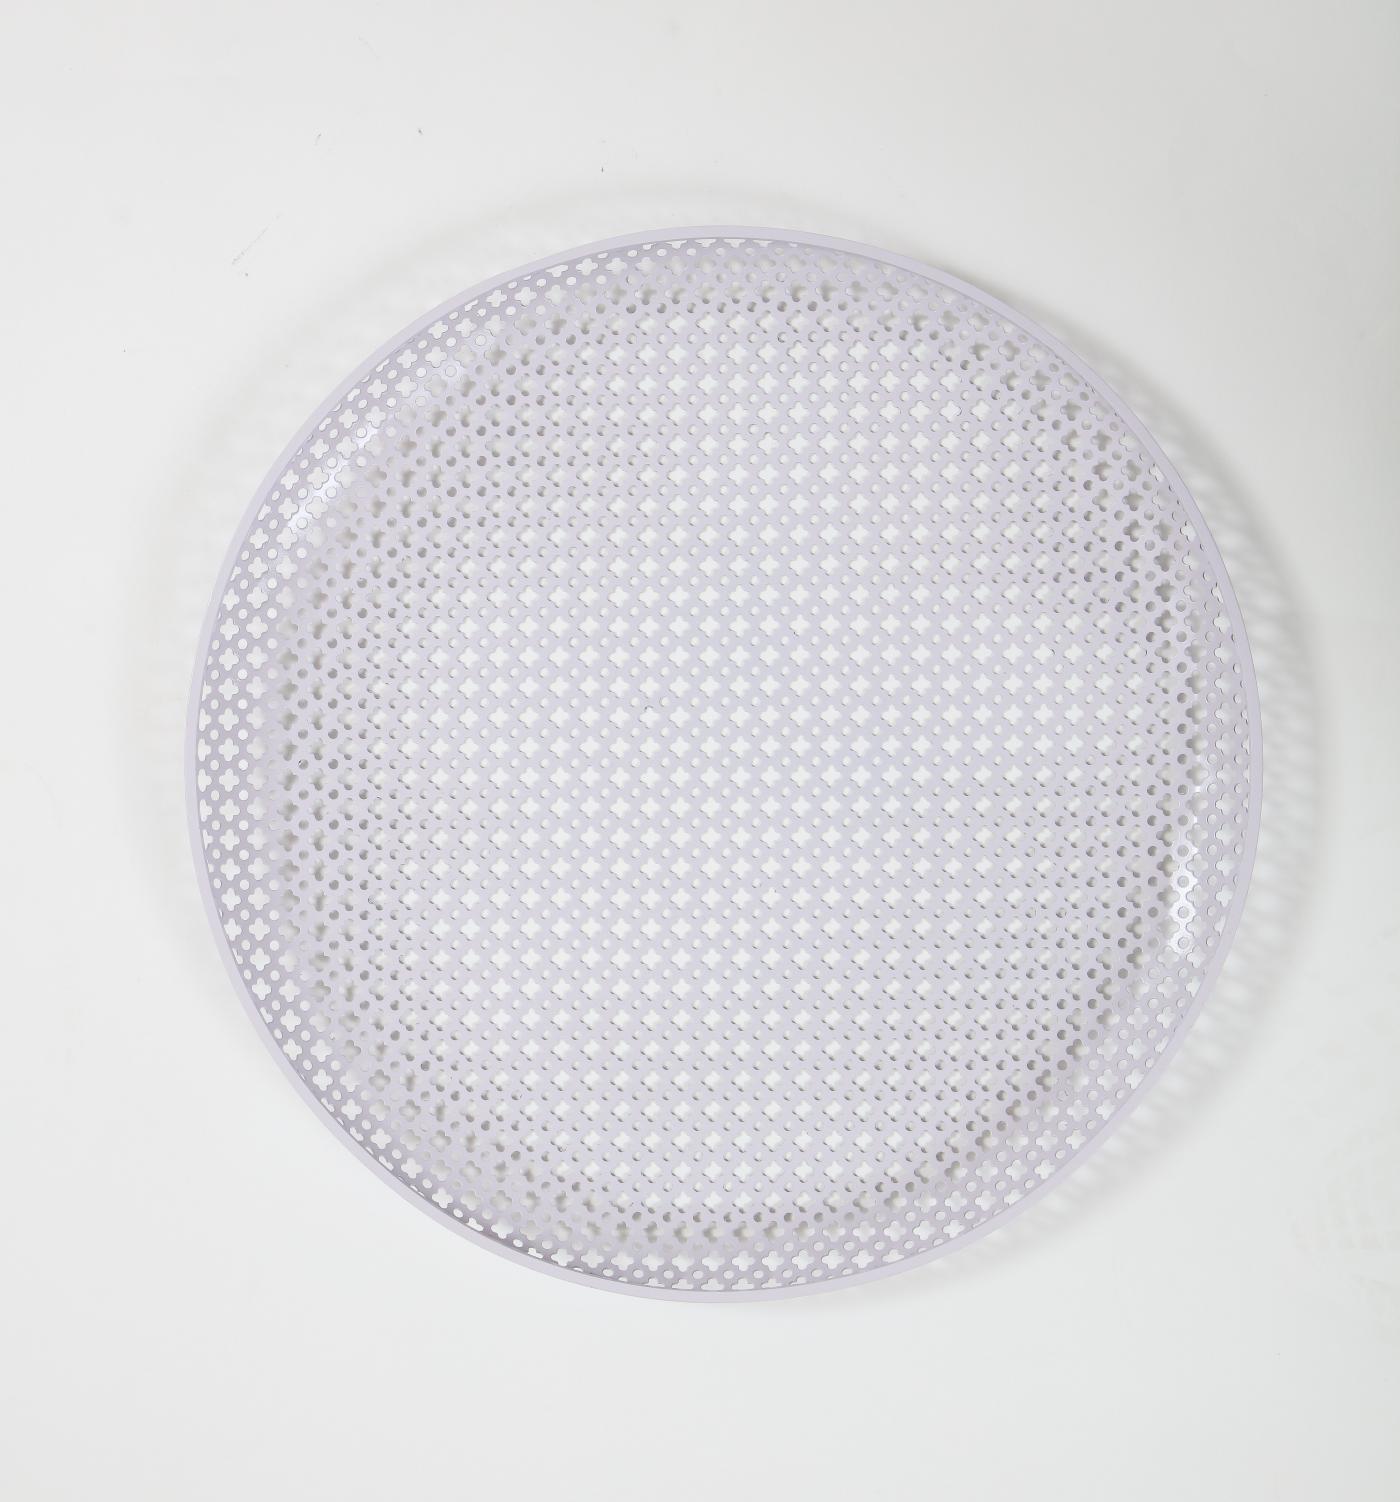 White Round Perforated Metal Tray by Mathieu Mategot, France, c. 1950 For Sale 1